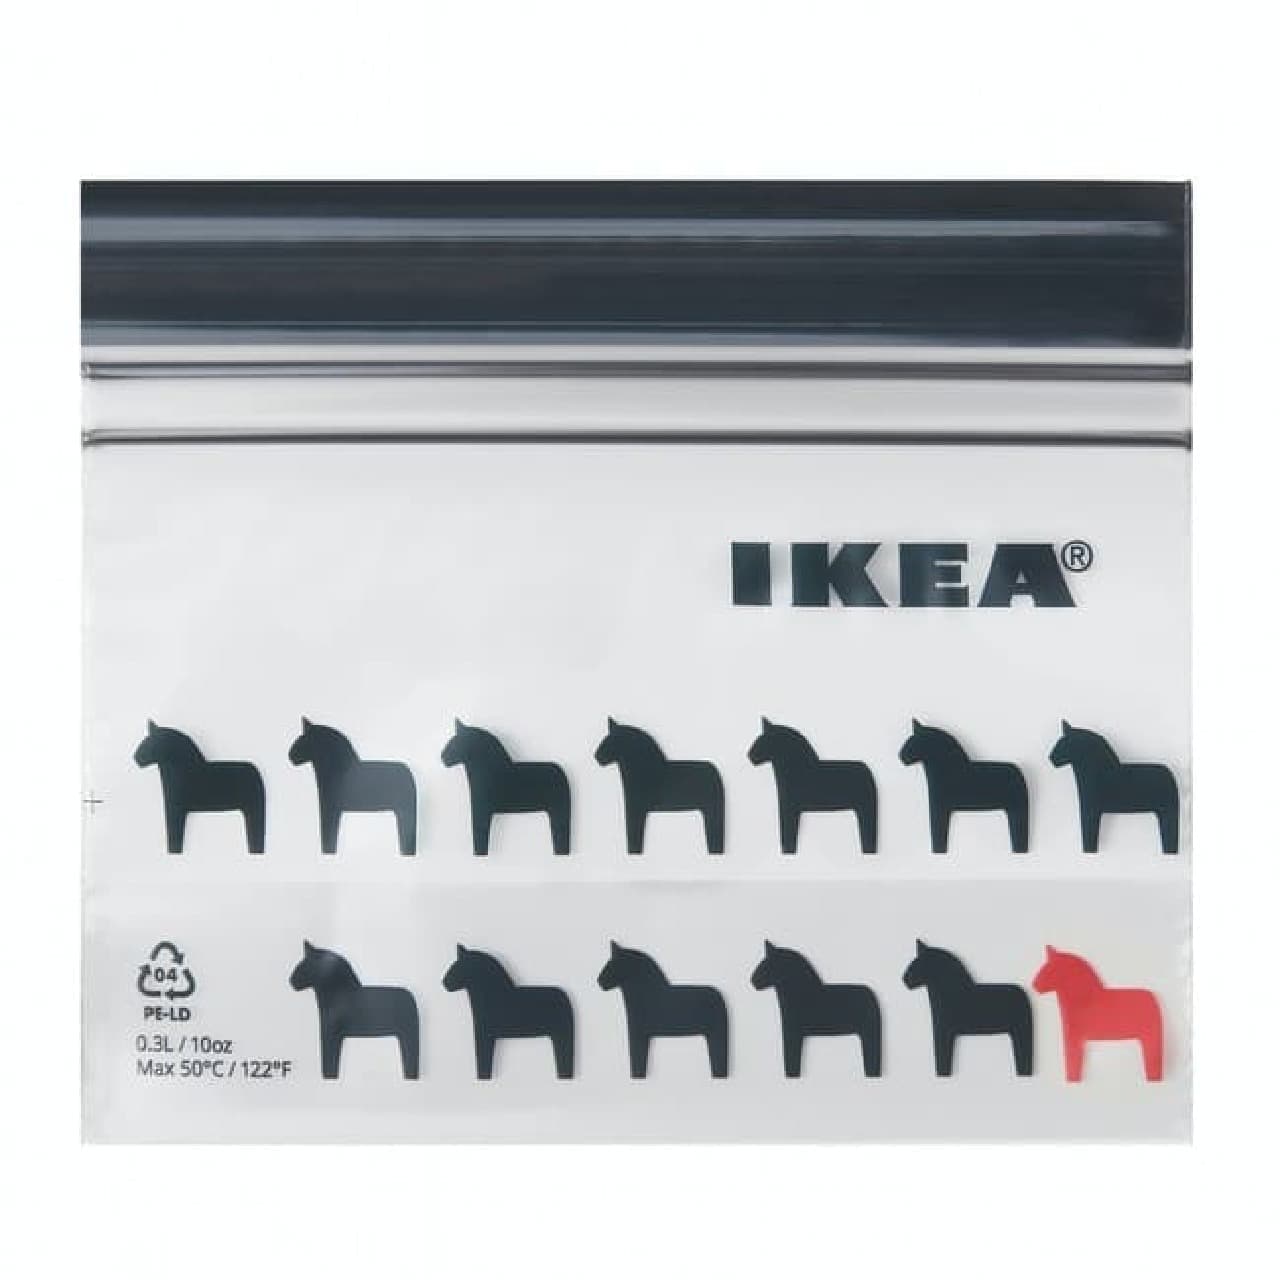 Ikea Hestage Collection -- Freezer bags, mugs, cushions, etc. with cute horse motifs